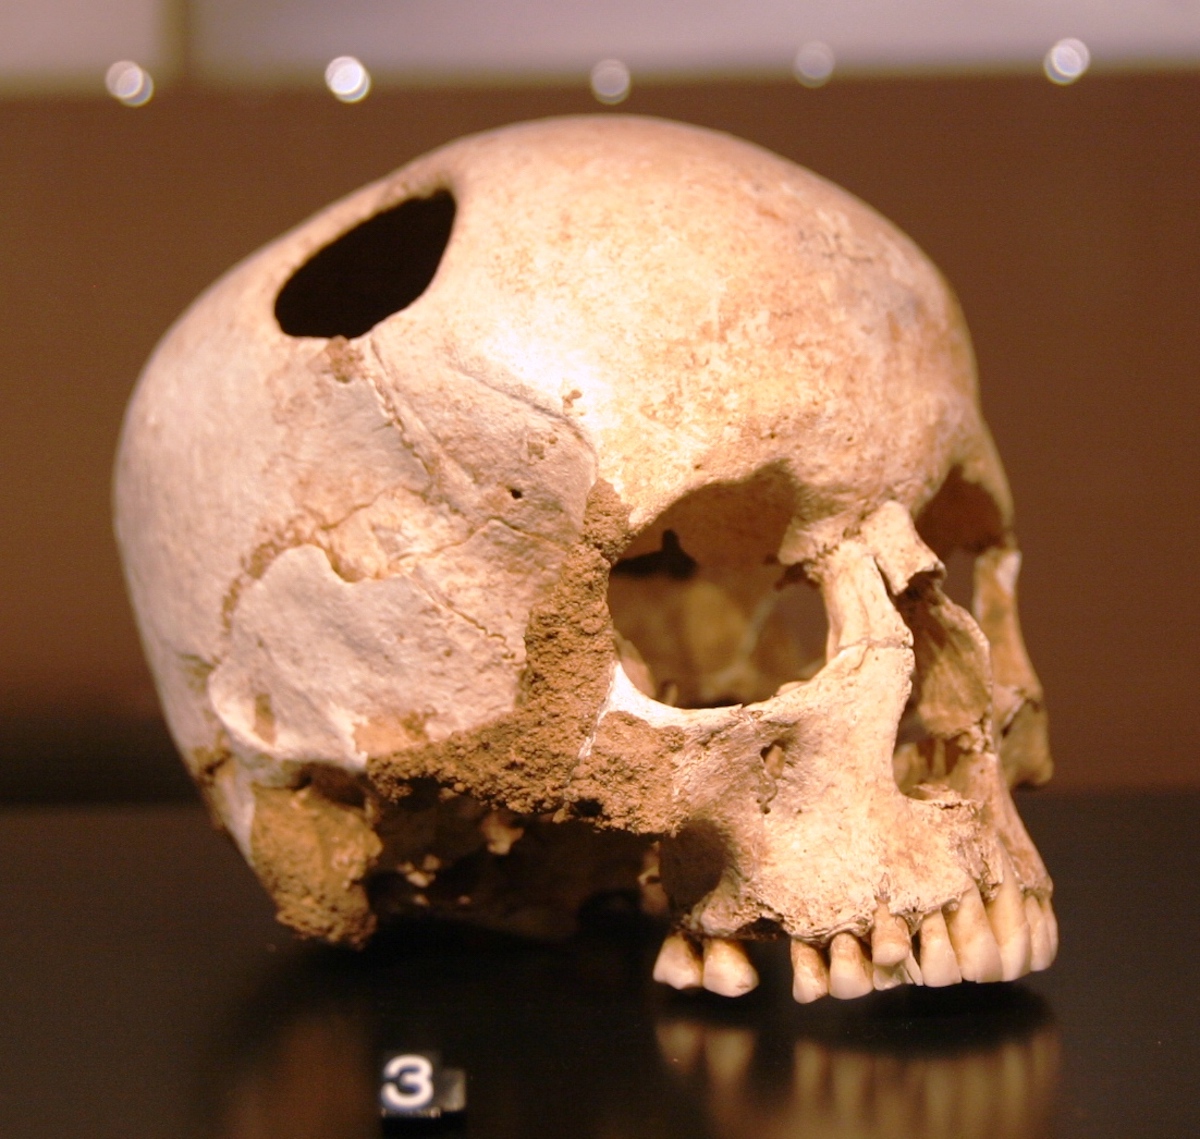 Brain surgery that humans practiced 5,000 years ago

